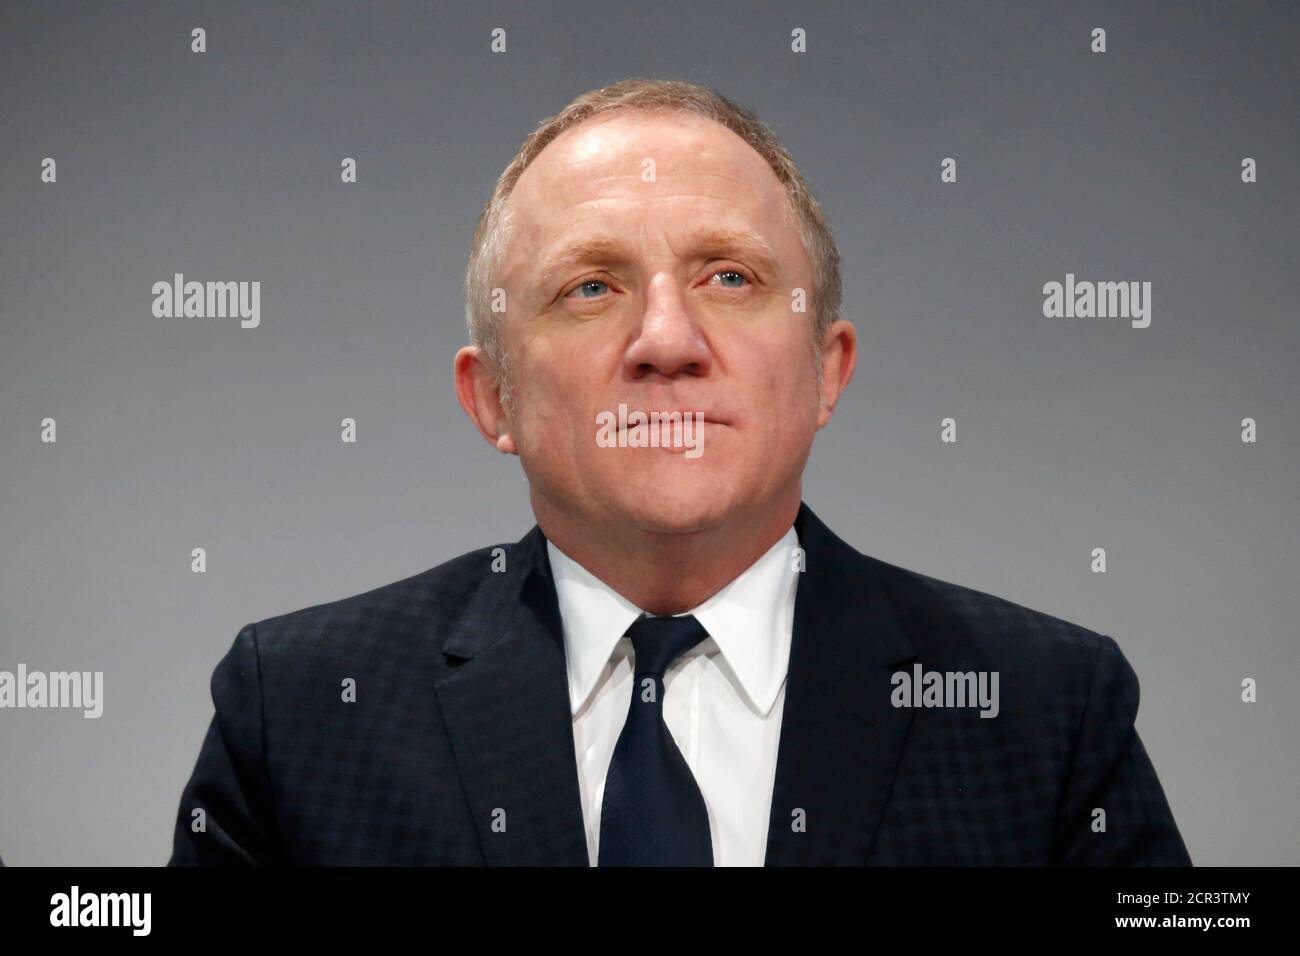 Ceo Of Kering High Resolution Stock Photography and Images - Alamy